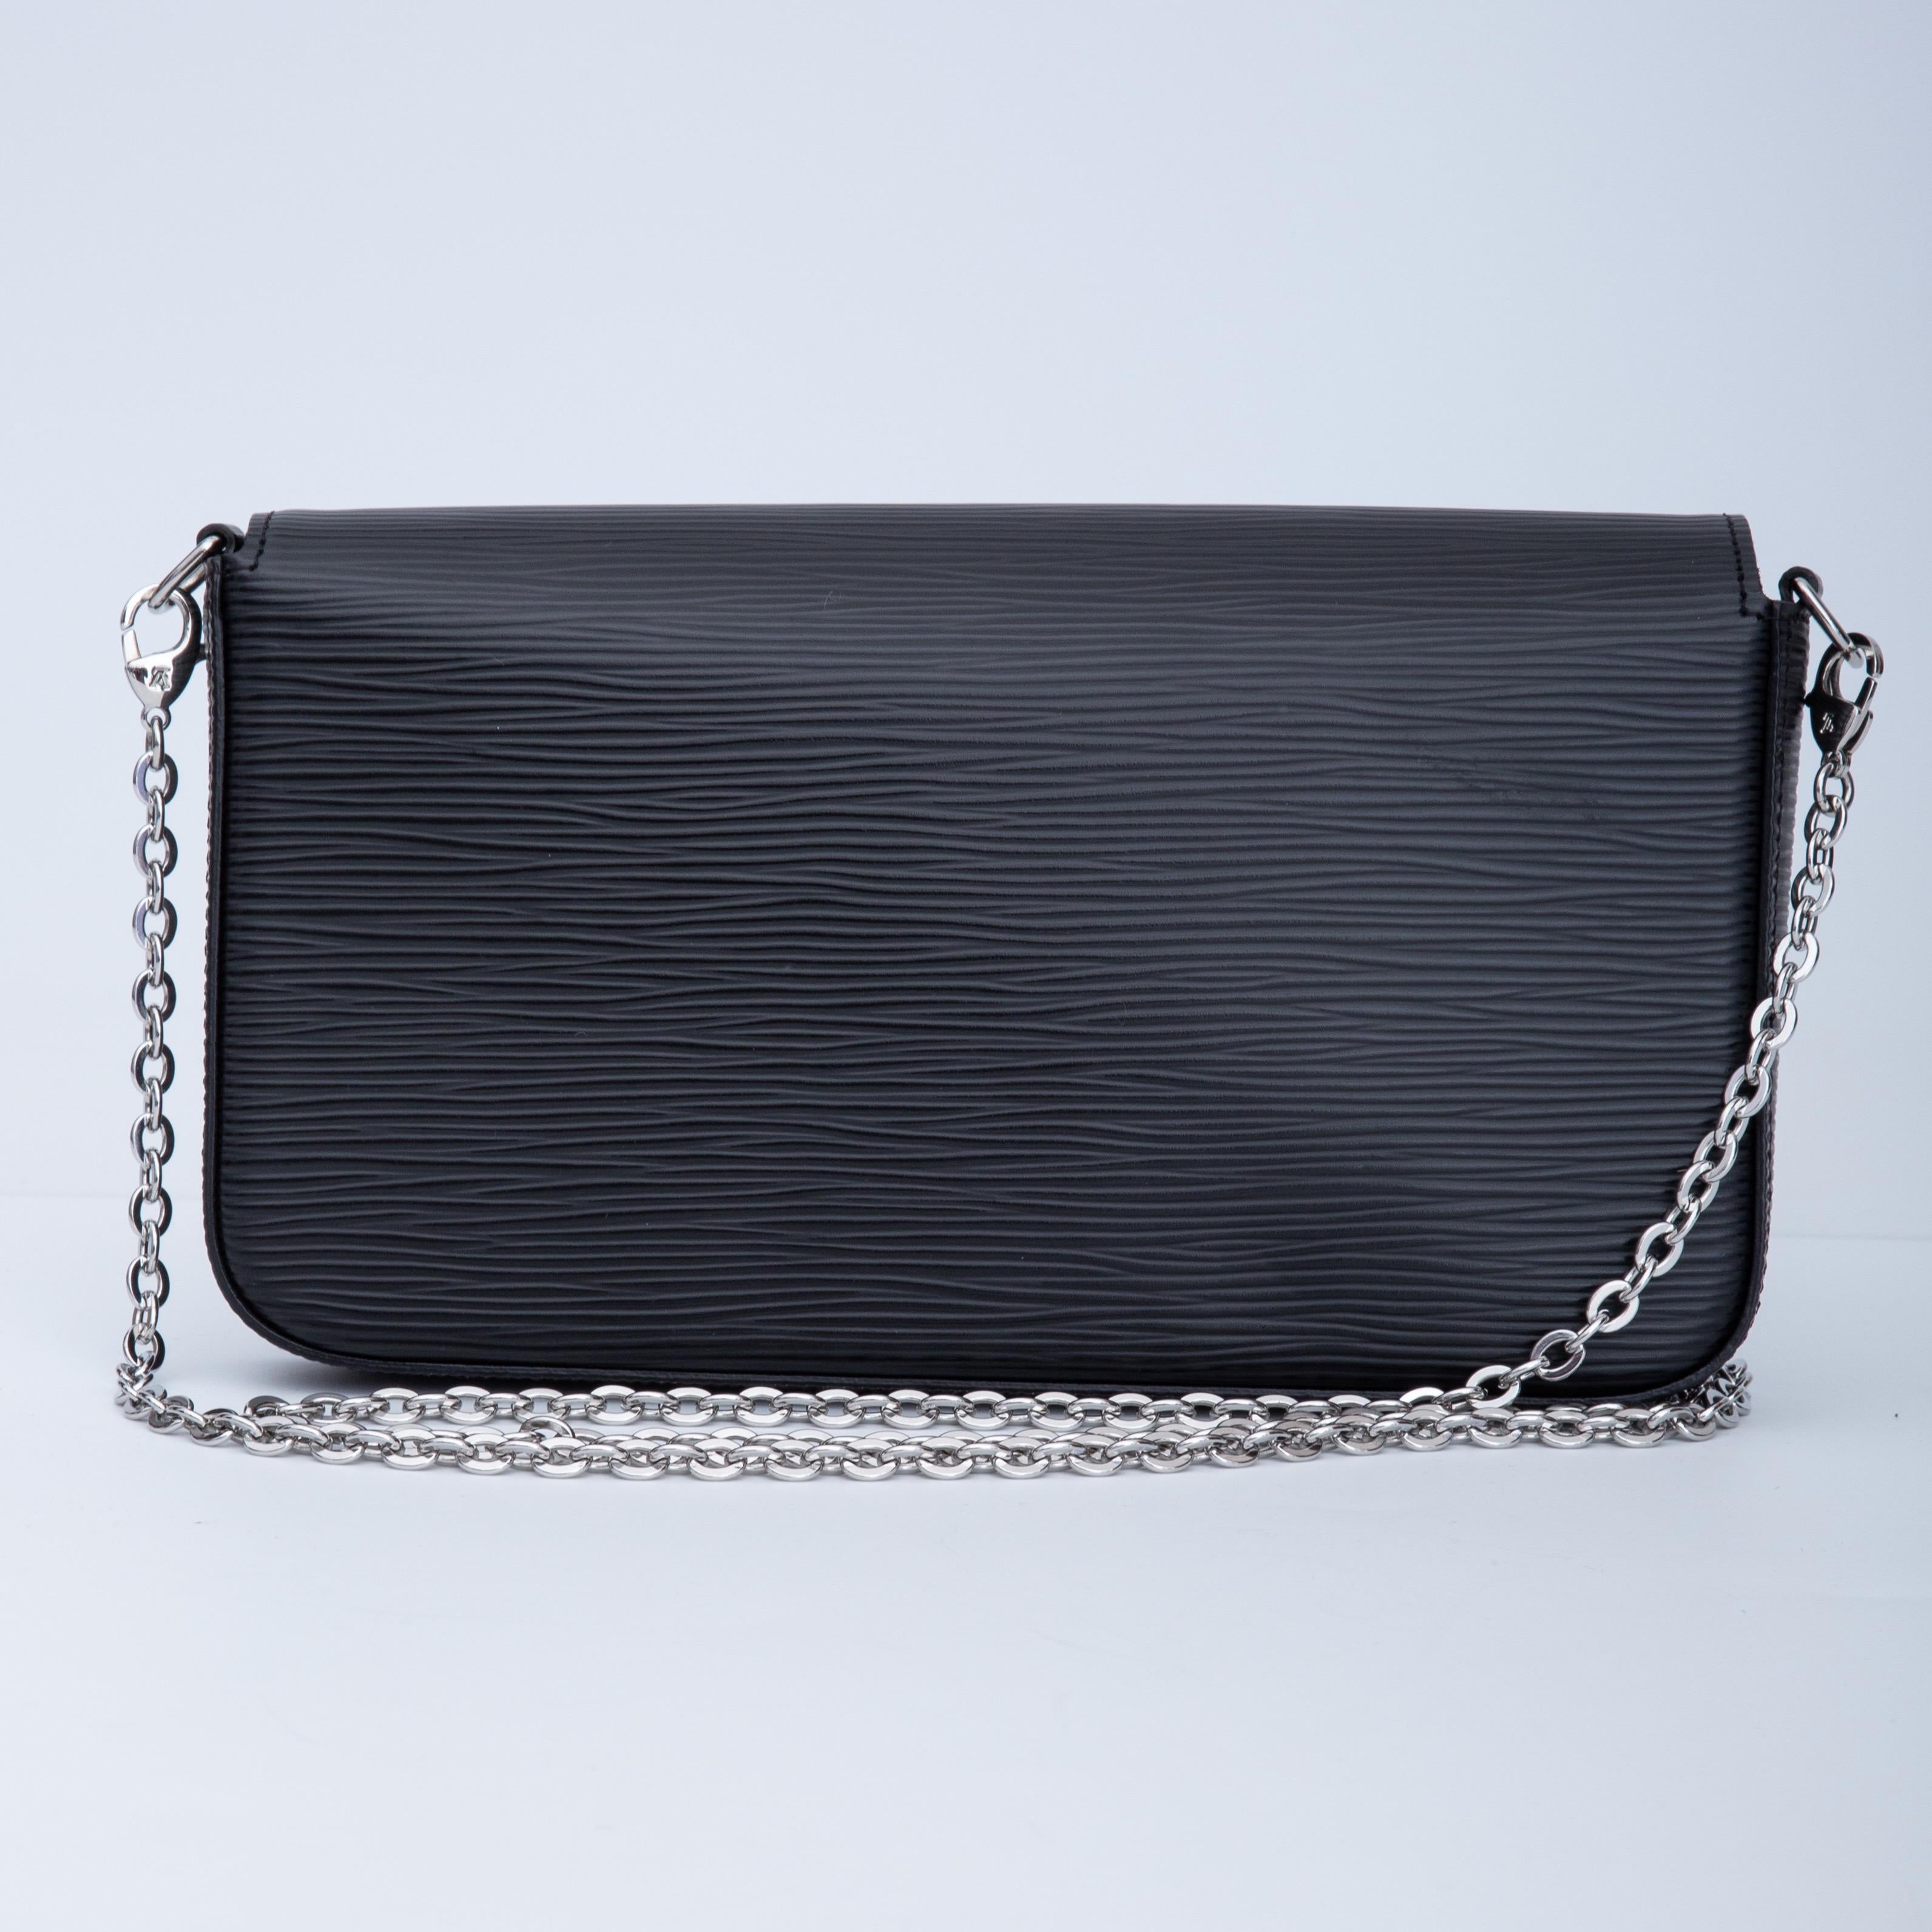 This shoulder bag is made of Louis Vuitton epi leather in black. This bag features a removable silver chain shoulder strap, envelope style flap with snap closure and a black microfiber interior with a patch pocket.

COLOR: Black
MATERIAL: Epi